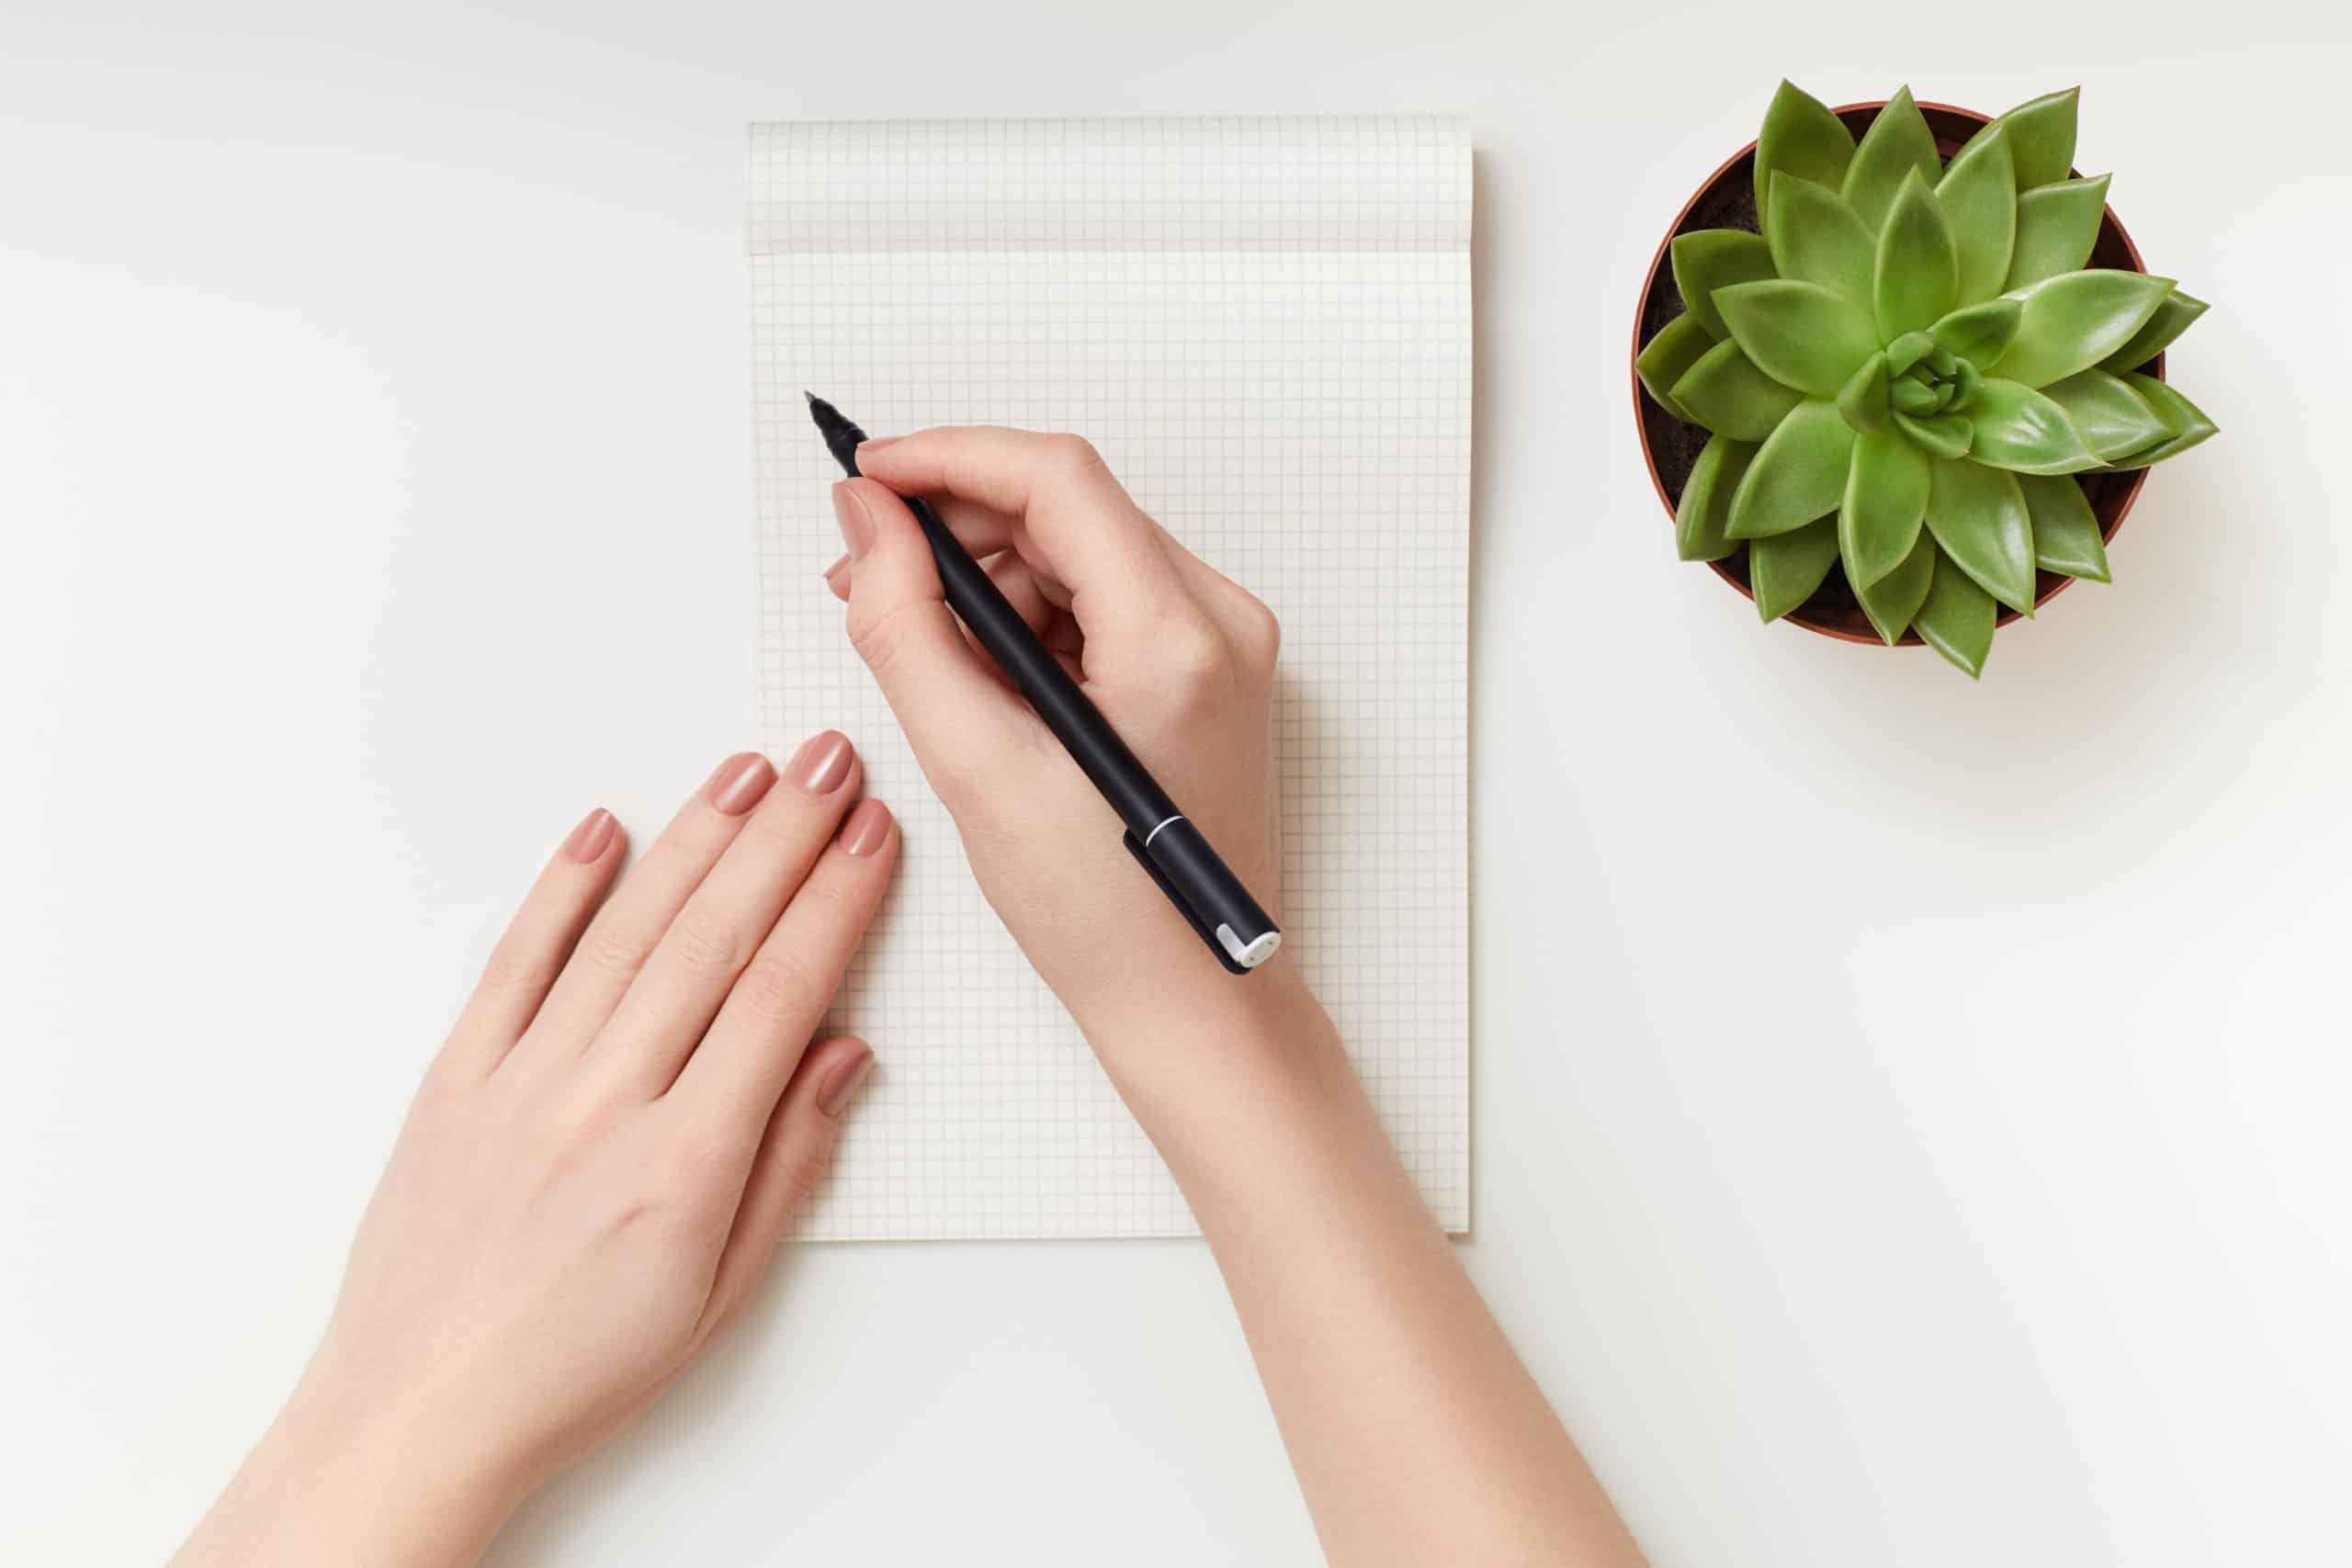 Woman's hands holding a pen over paper and a succulent plant